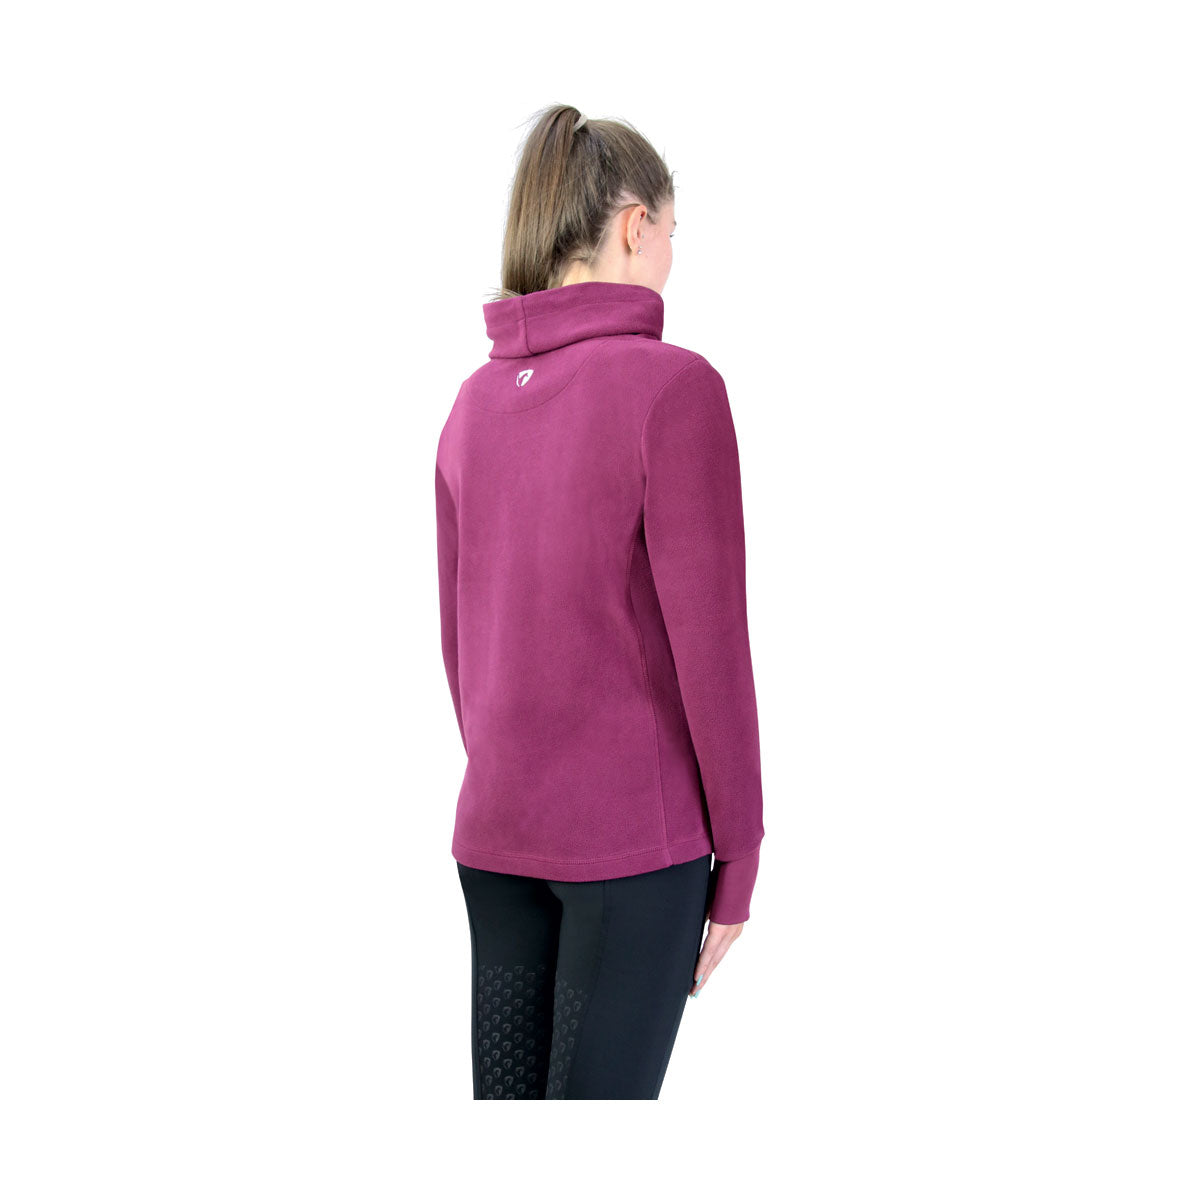 Synergy Cowl Neck Top in Fig